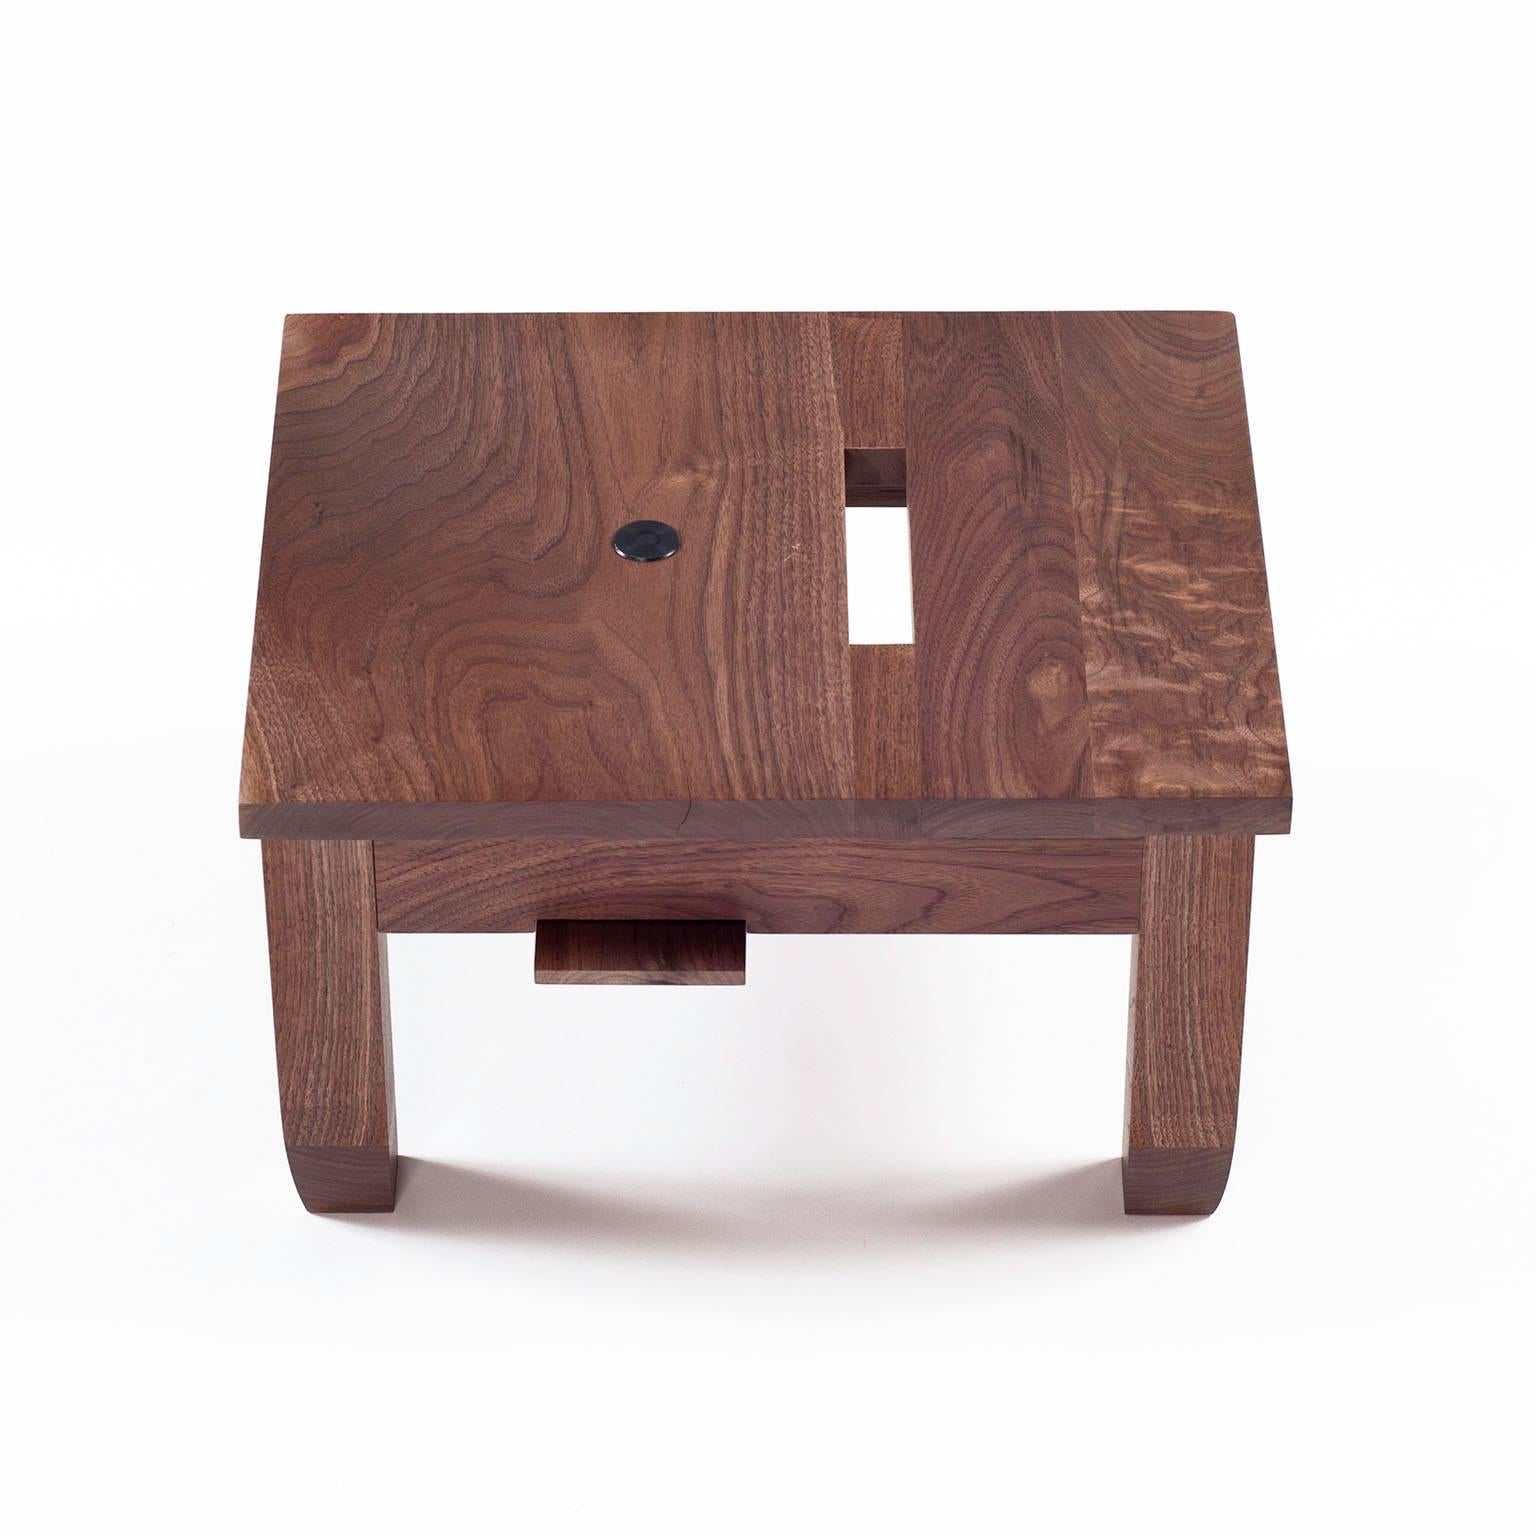 Modern Contemporary Hardwood Walnut Low Prayer Stool Made in Brooklyn in Stock For Sale